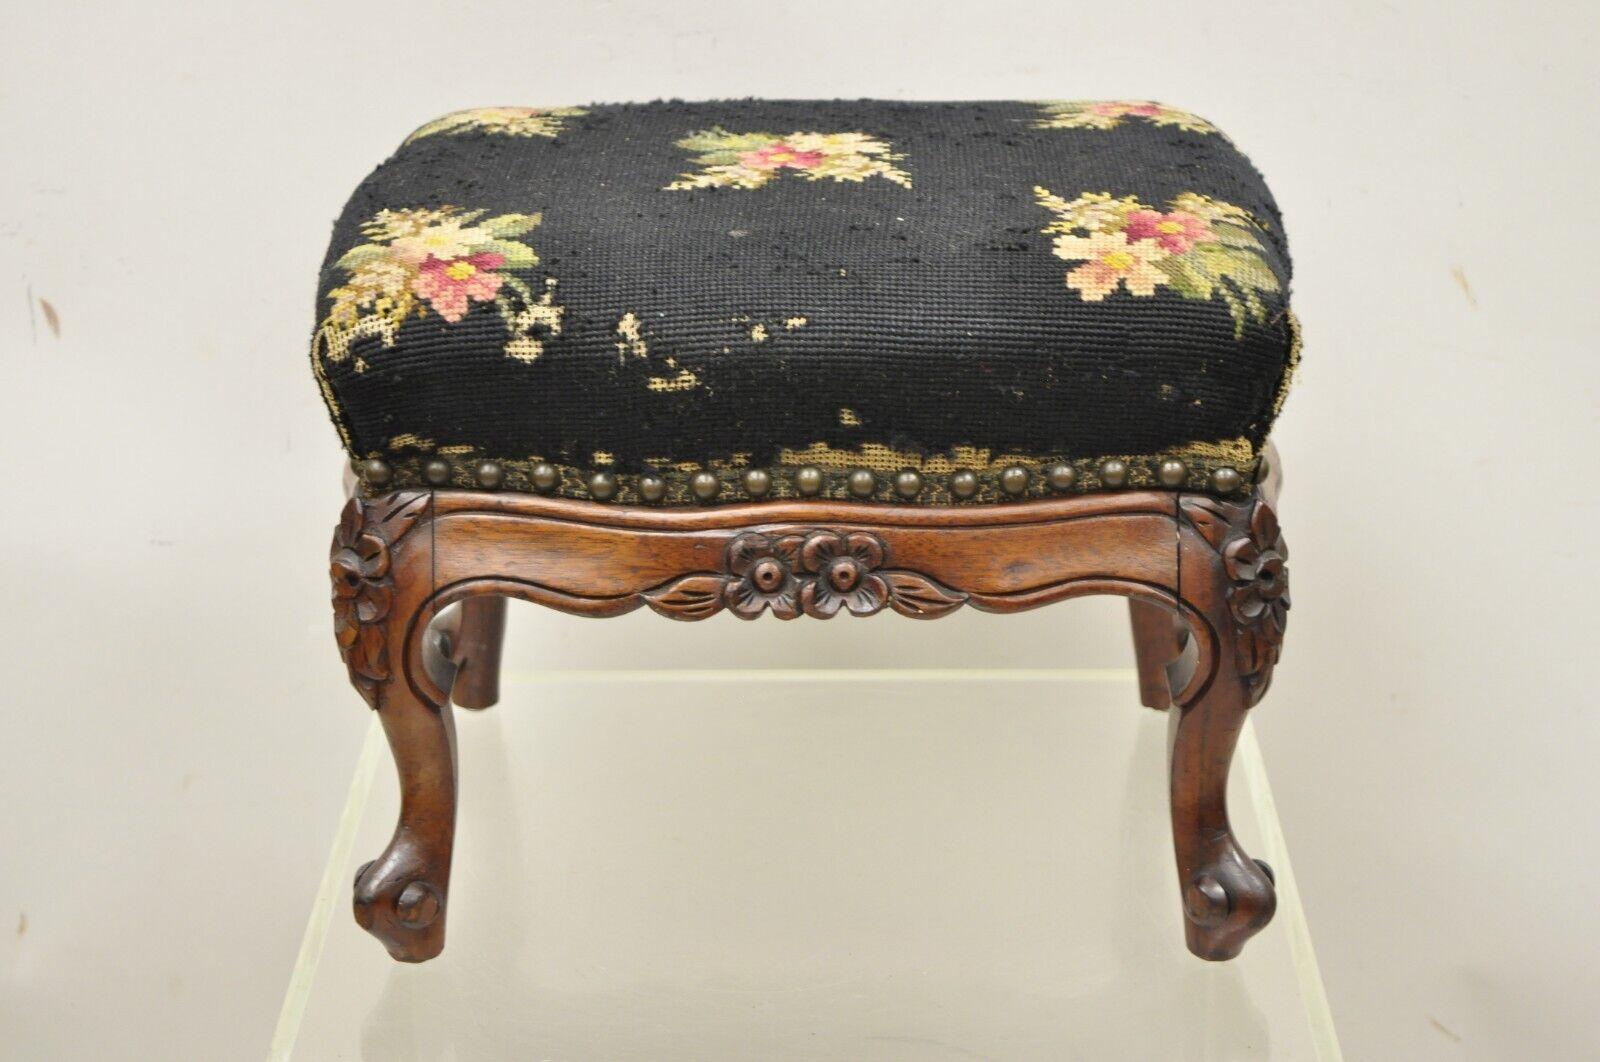 Antique Colonial furniture mahogany needlepoint footstool ottoman stool. Item features a solid mahogany frame, floral carved details, needlepoint seat, original label, cabriole legs, very nice antique item circa early 1900s. Measurements: 11